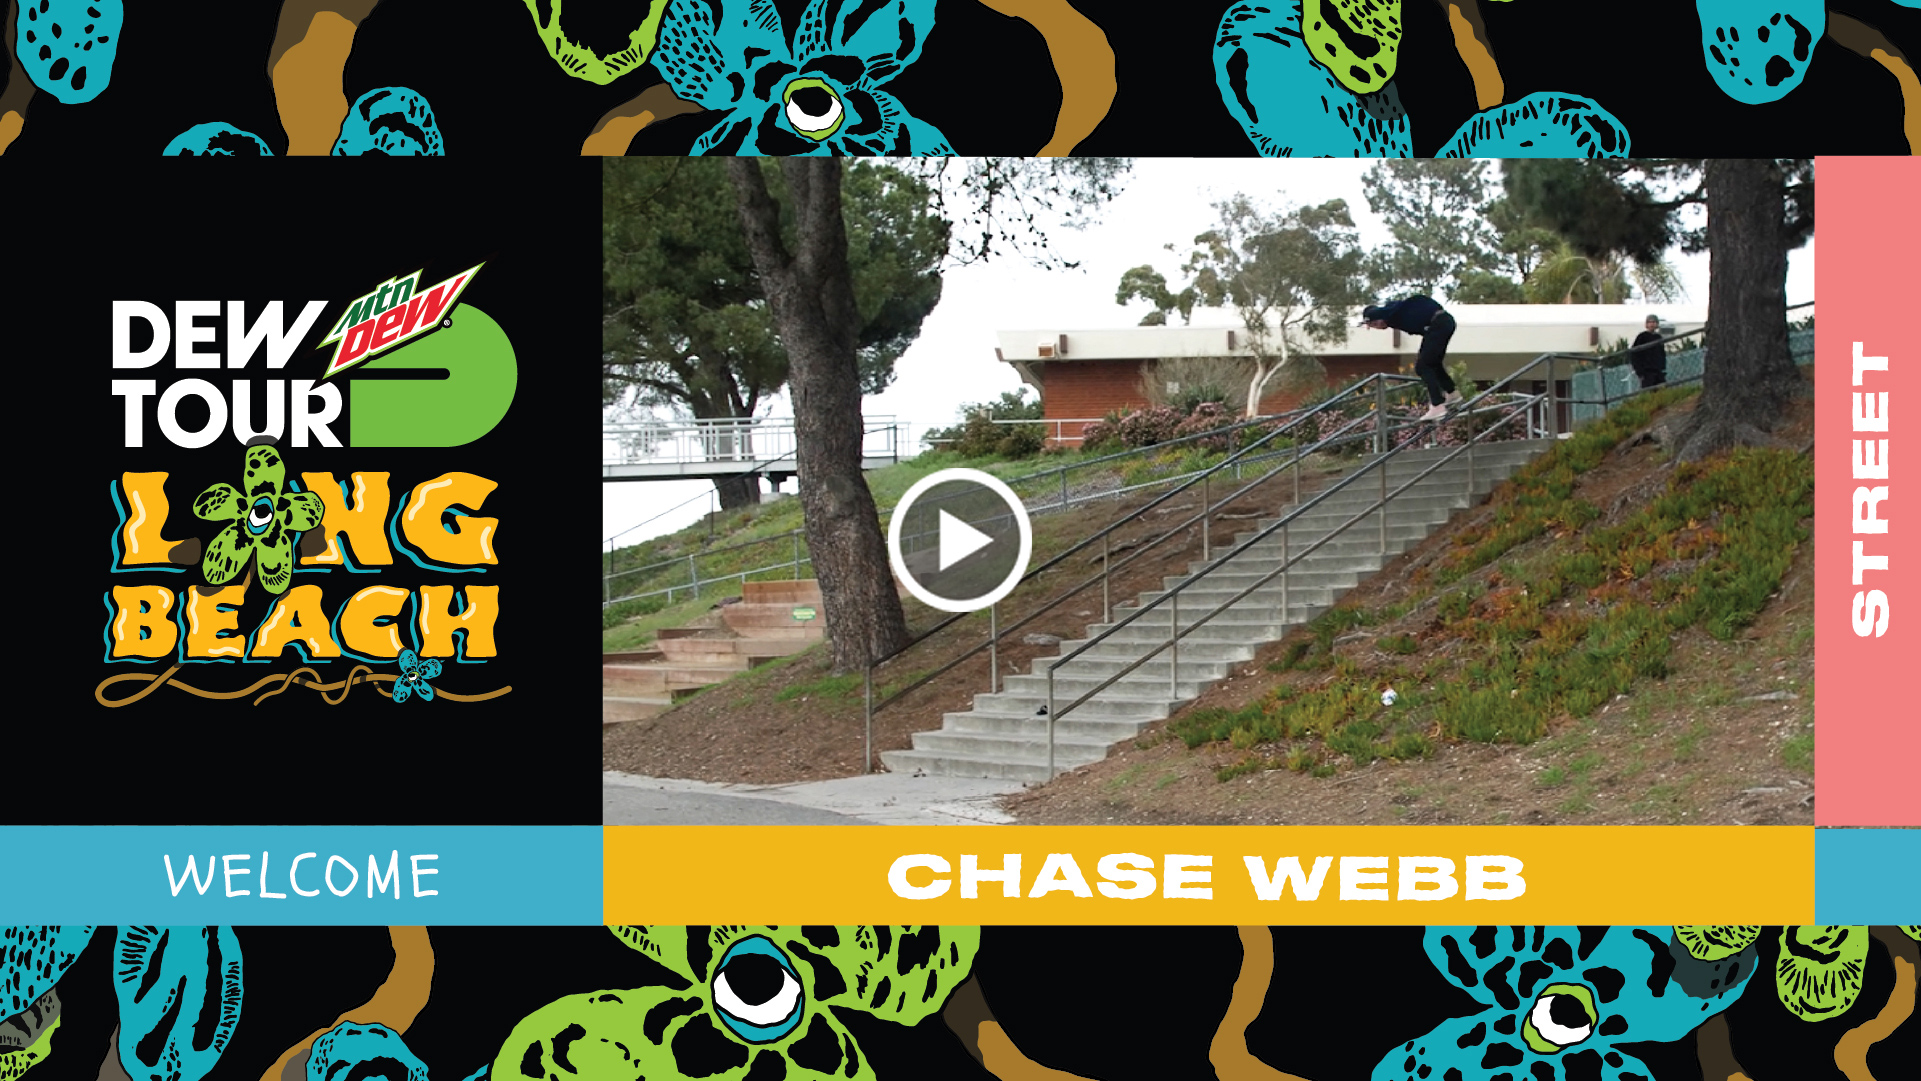 Chase Webb Street Olympic Qualifier 2019